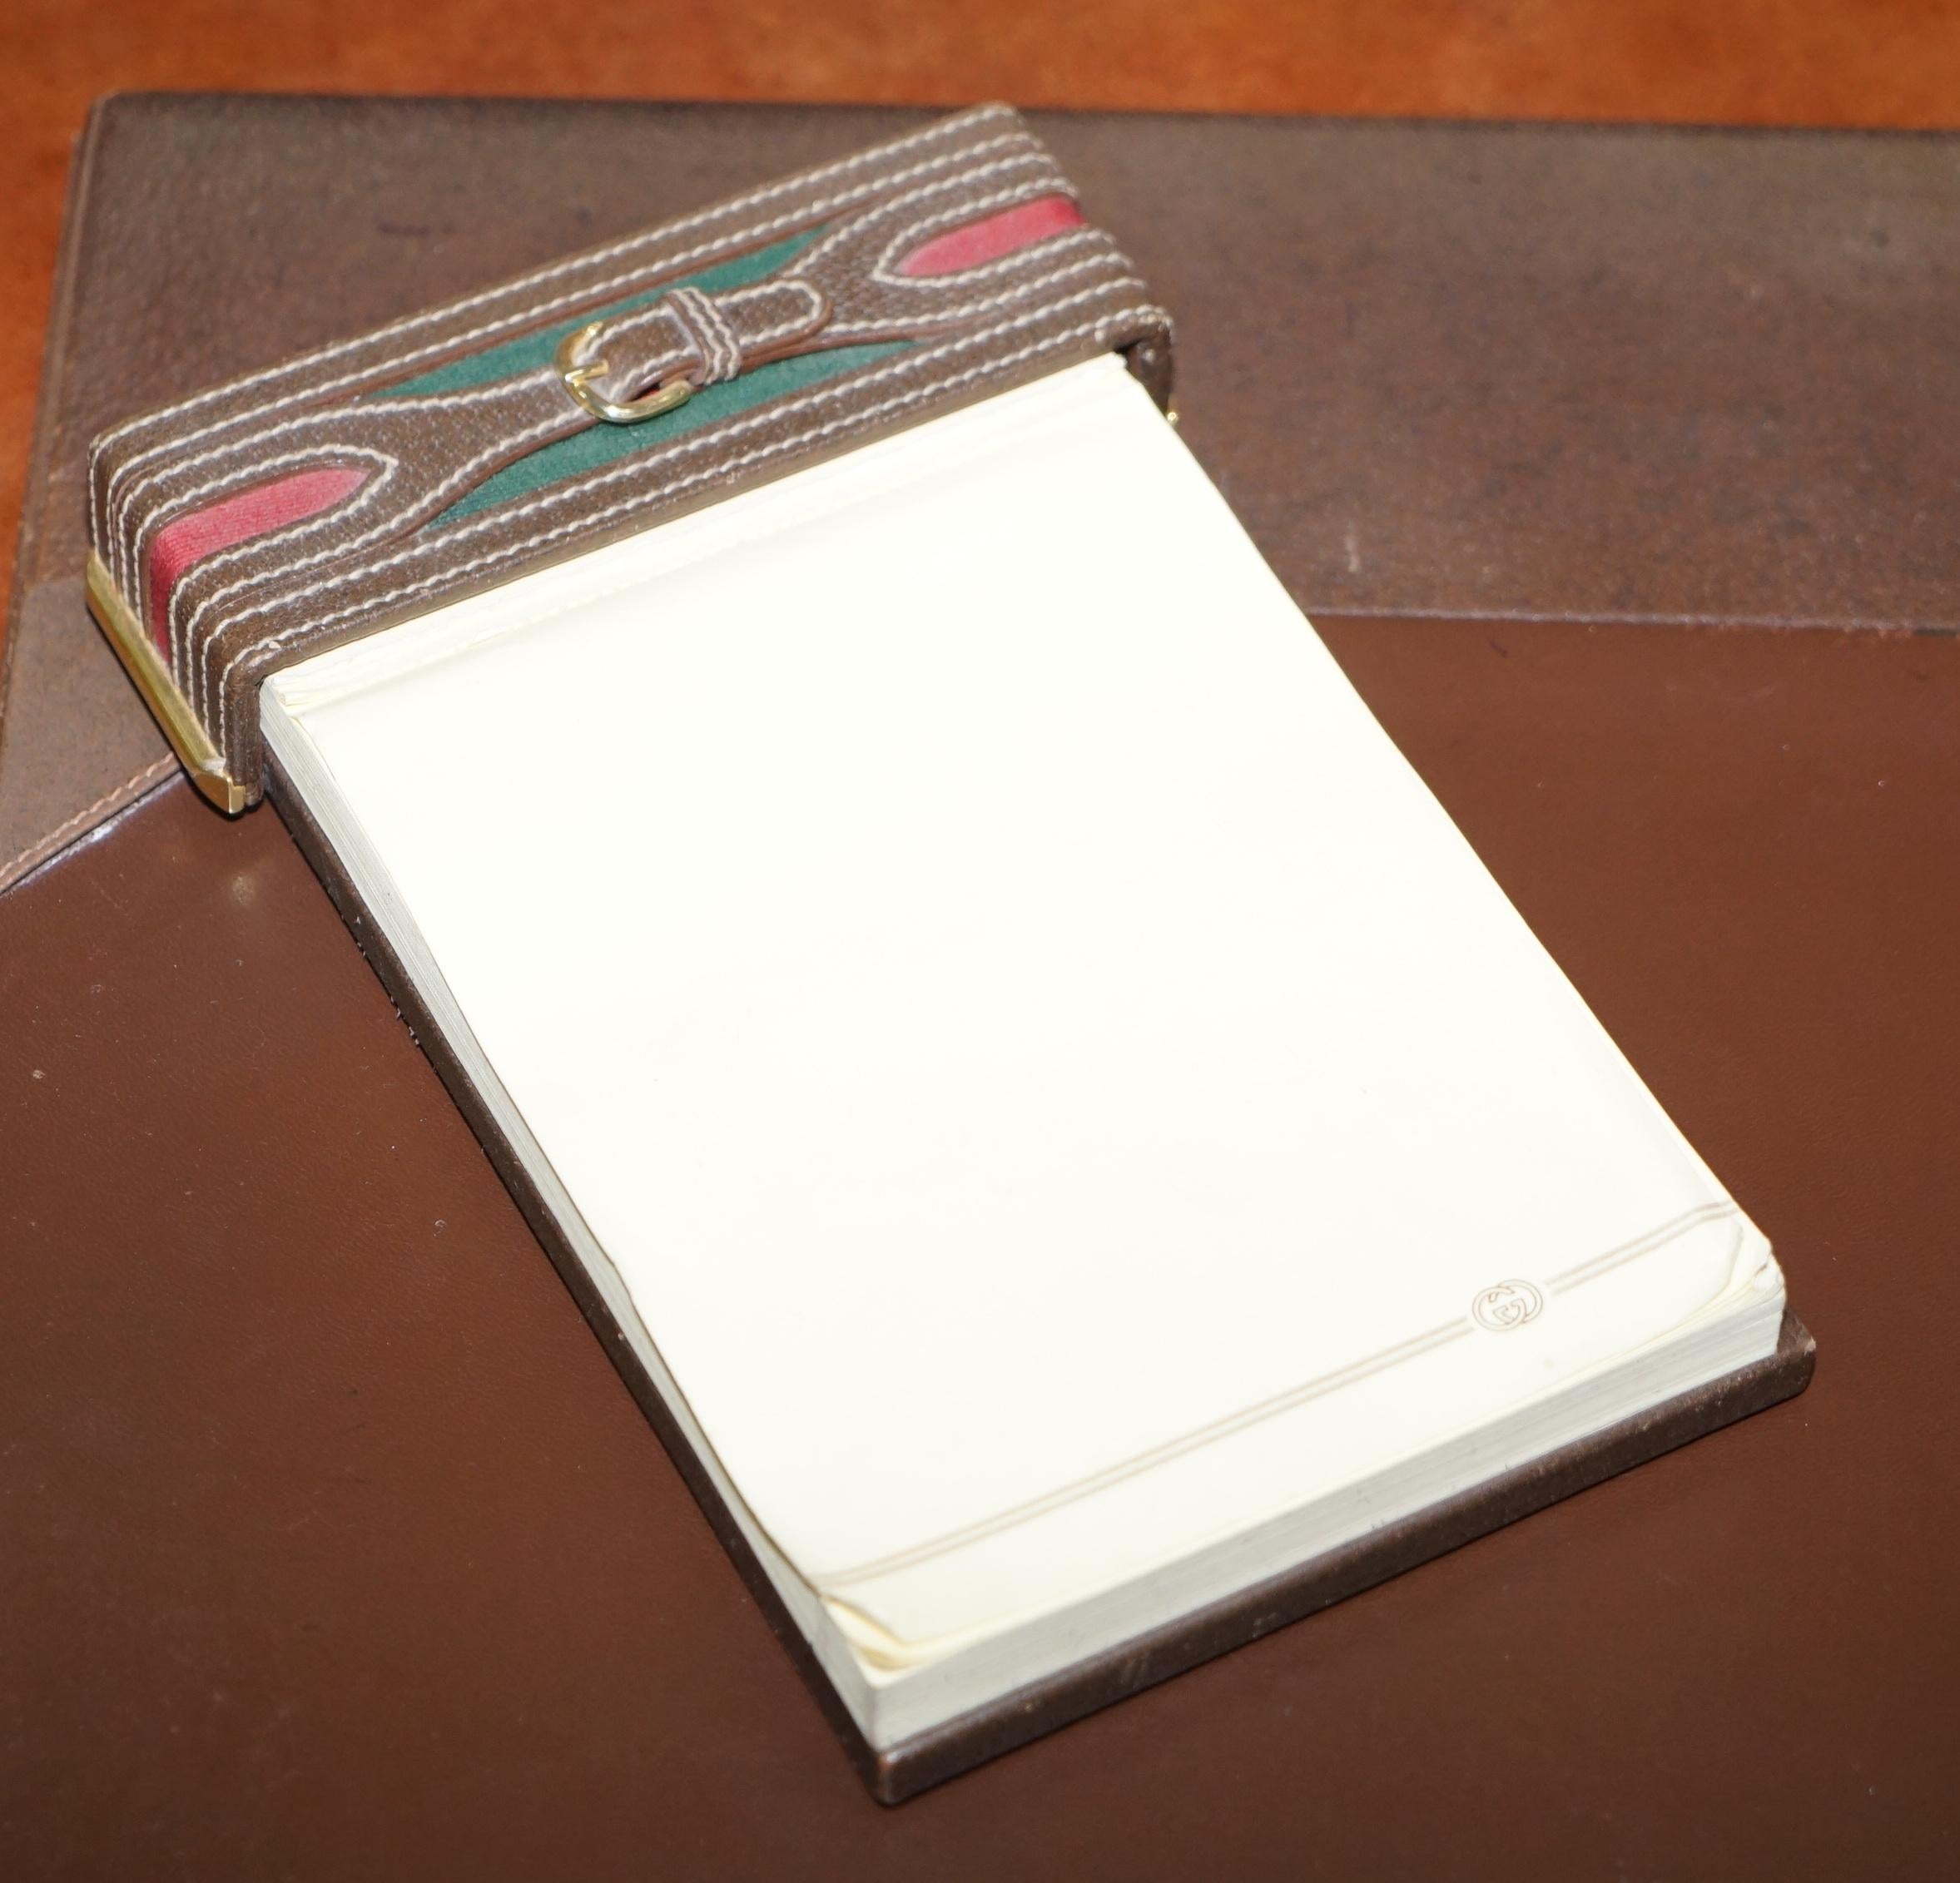 We are delighted to offer for sale this lovely suite of original circa 1960s Vintage Gucci brown leather desk accessories

A wonderful suite. This set includes the original pad, writing slope with removable secondary writing board and lastly the